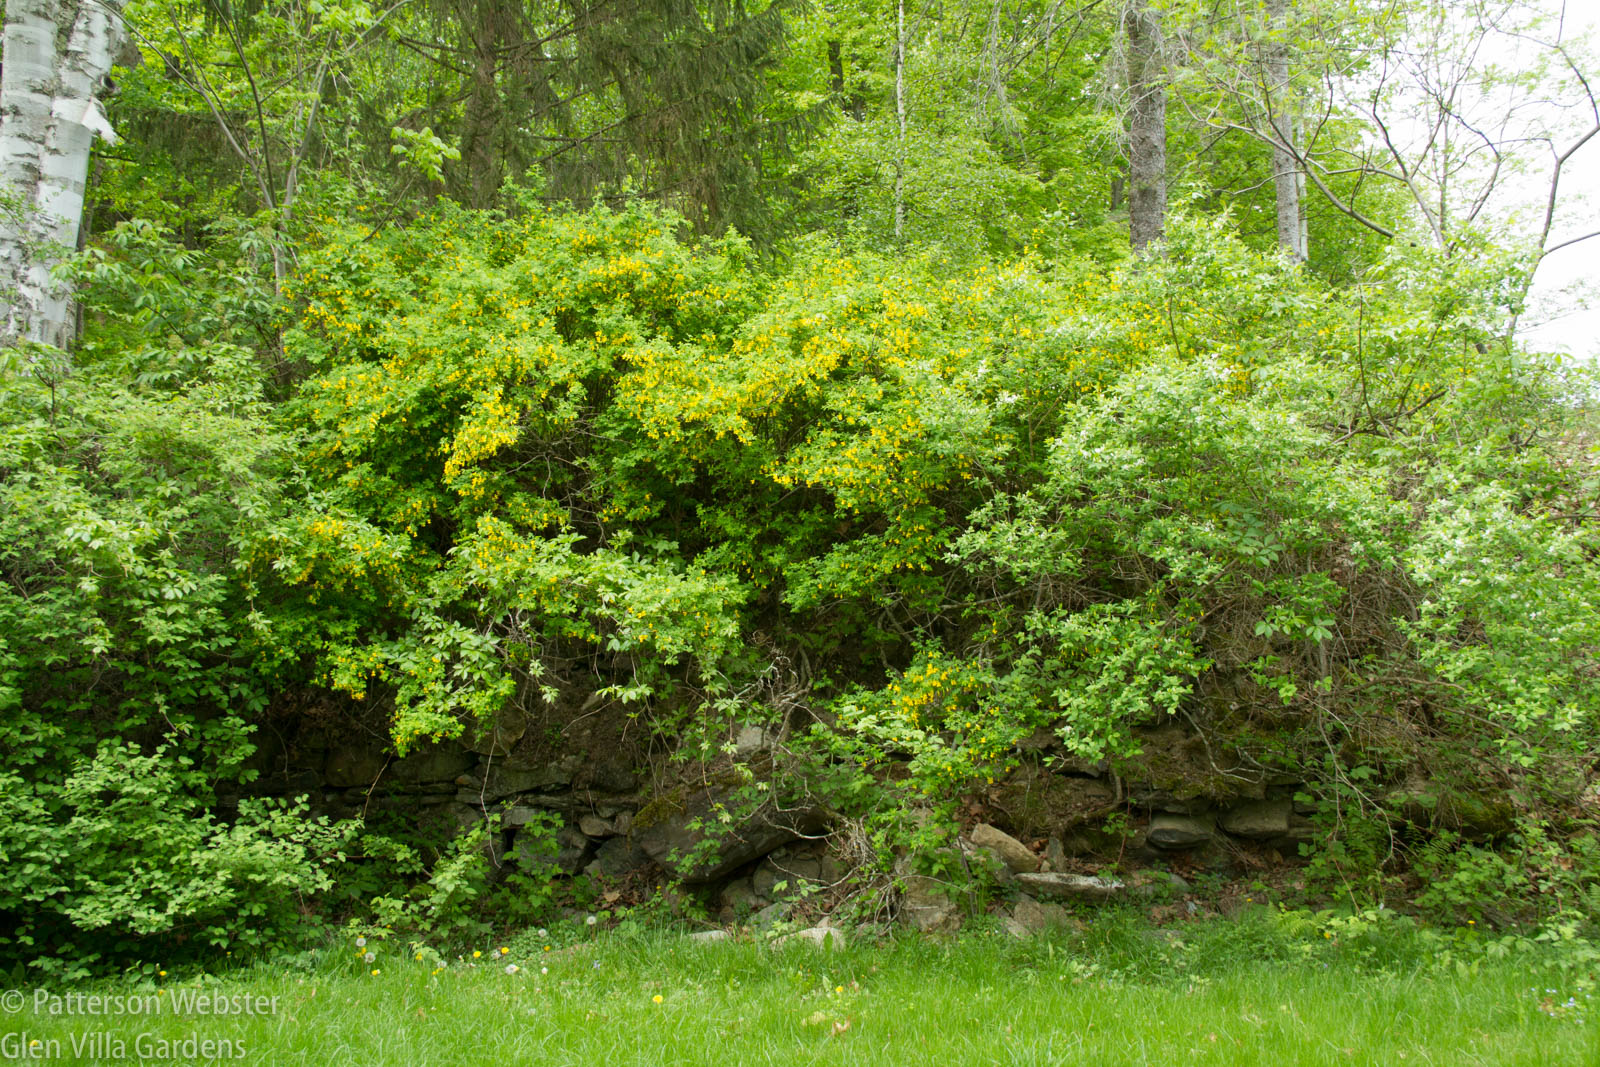 In 2018 the foundation wall was almost entirely hidden by vegetation. 